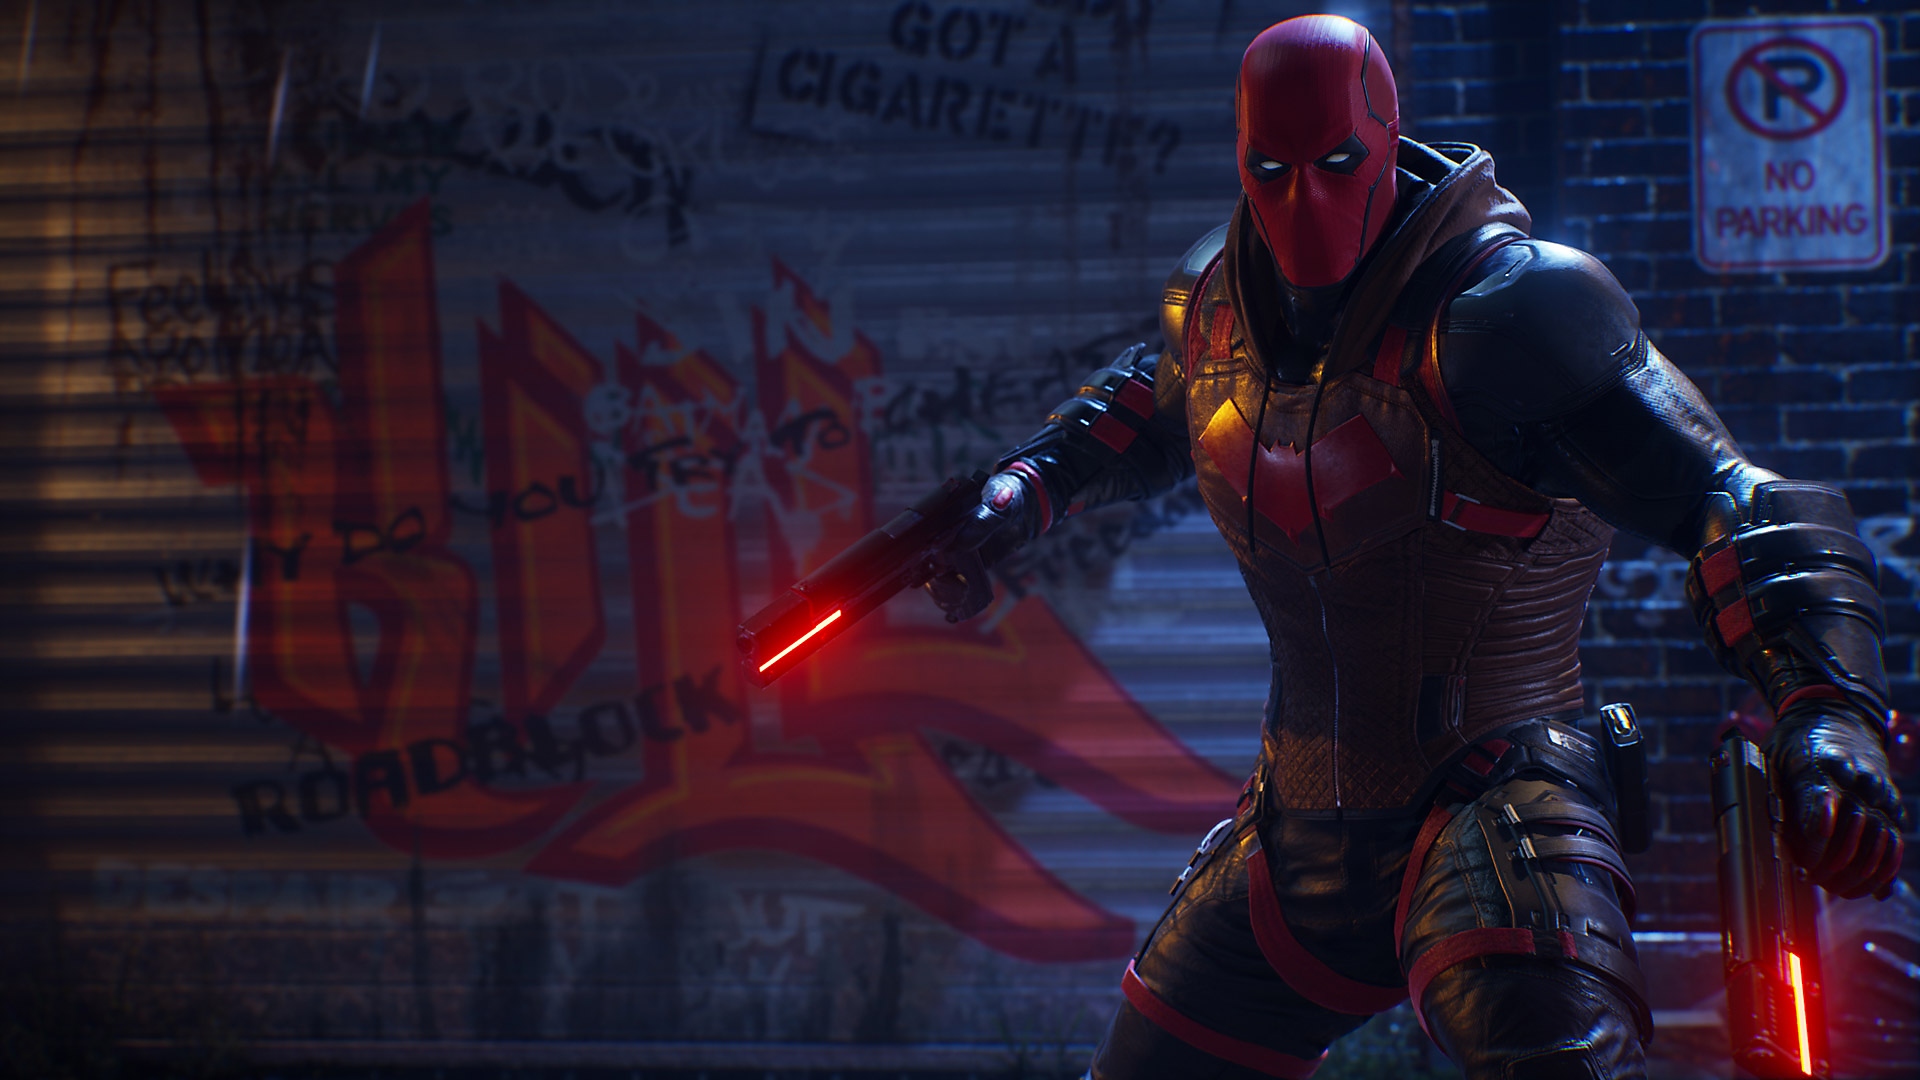 Gotham Knights screenshot - Red Hood with weapons in hands